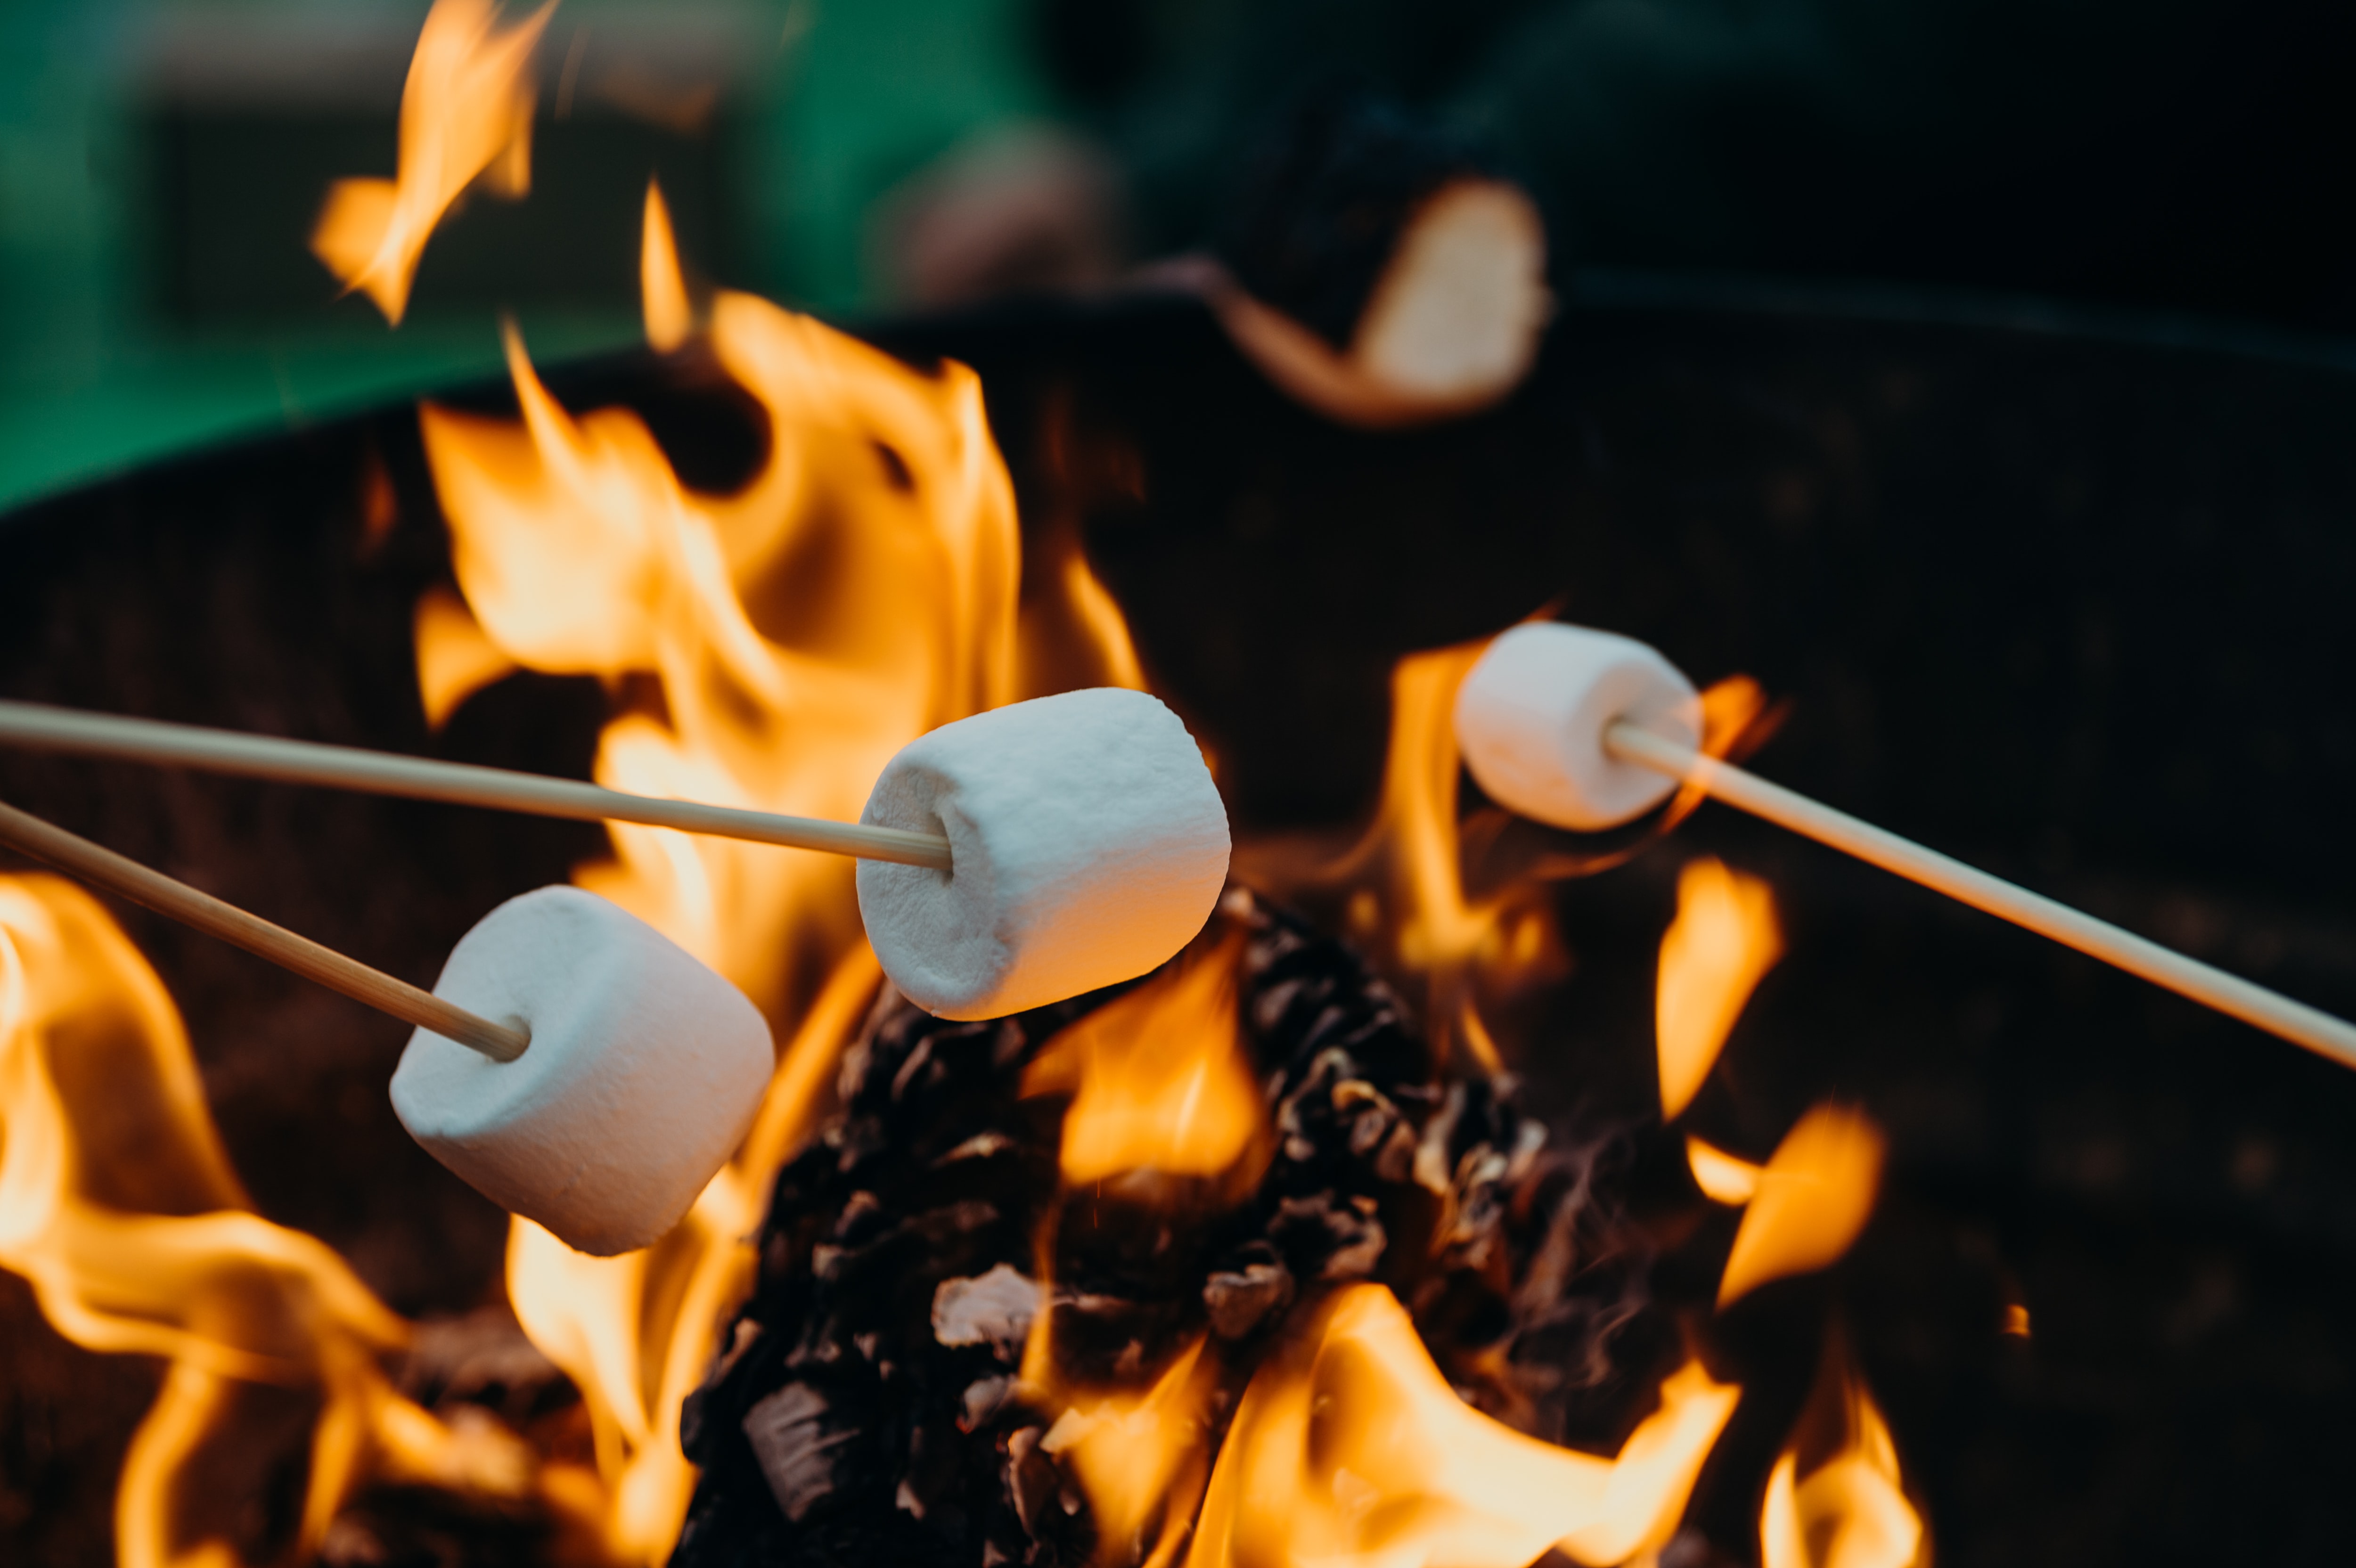 roast marsh mellows and regale an audience with these top user testing stories from 2020